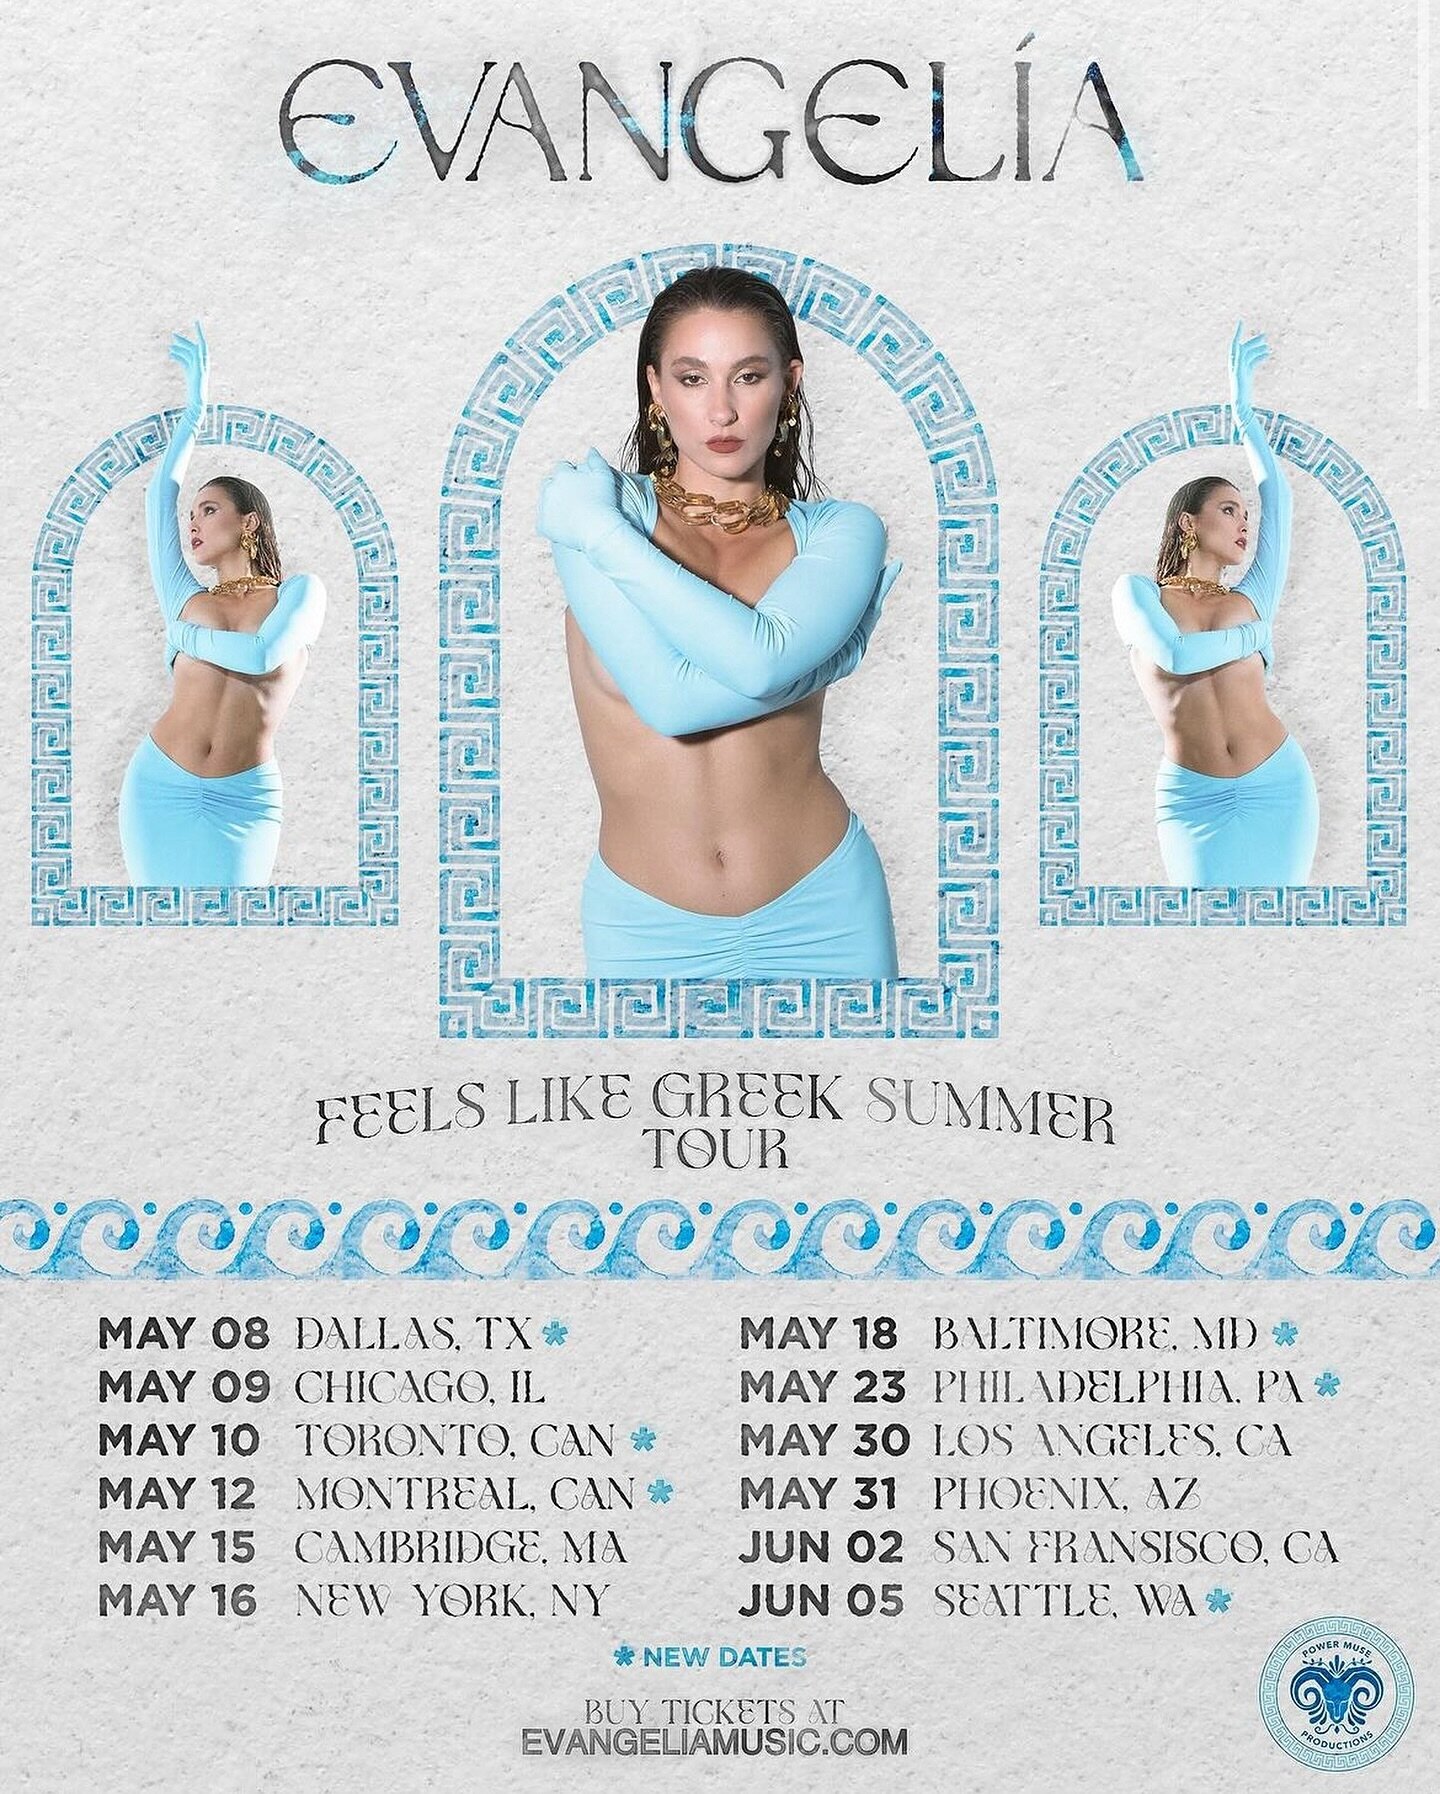 Evangelia hits the road in May! Tickets on sale now!